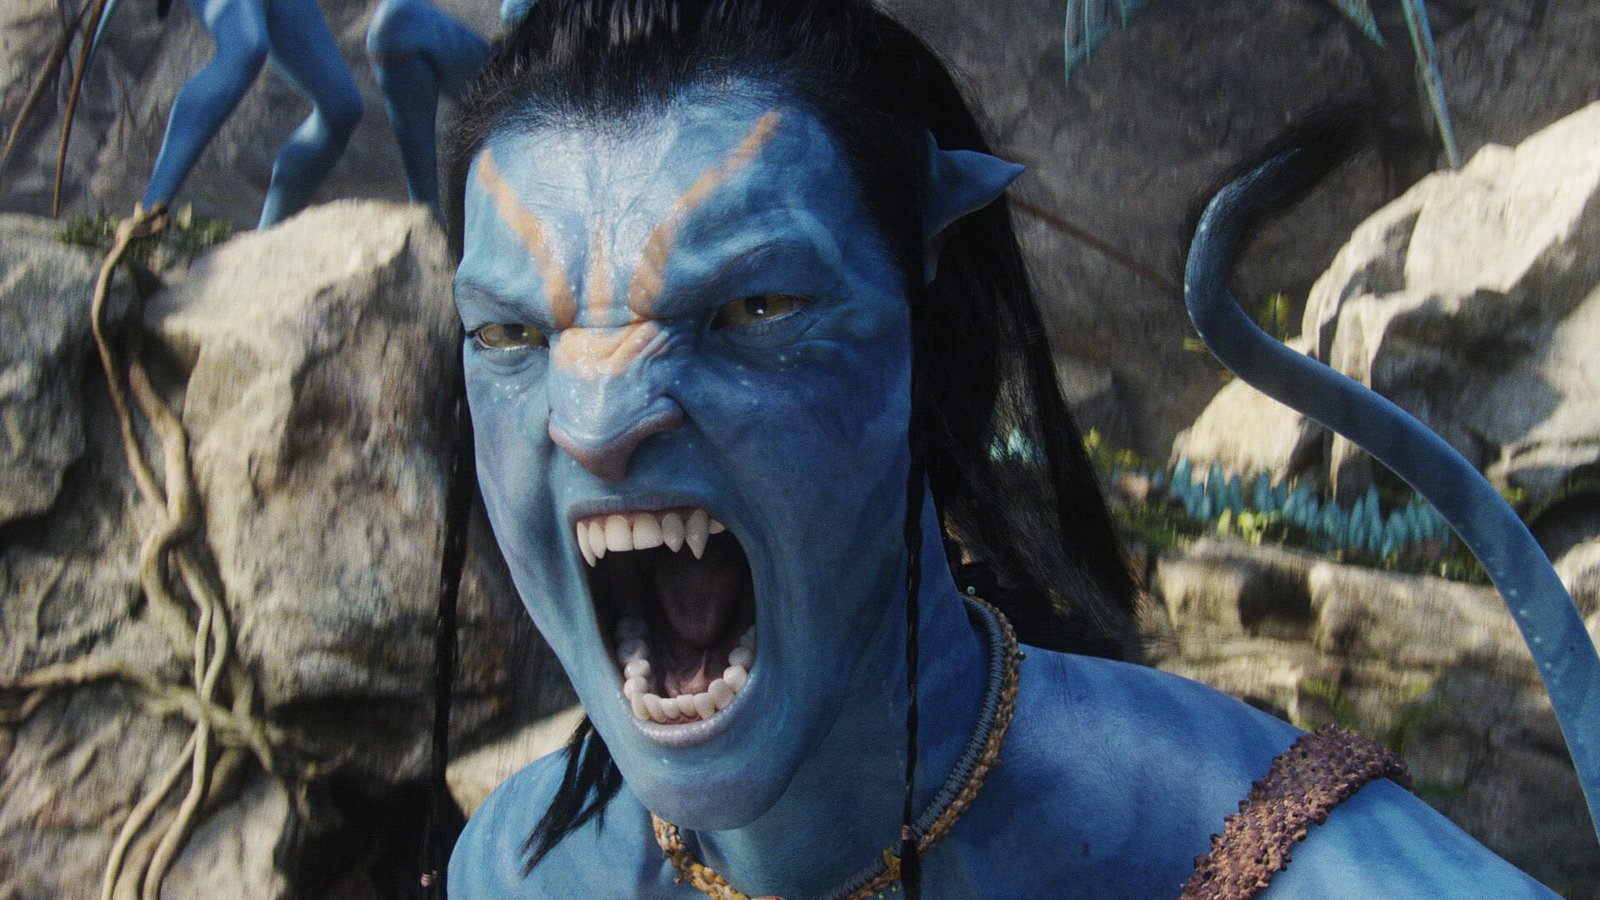 What Is The Expected Release Date Of Avatar 3, 4, And 5